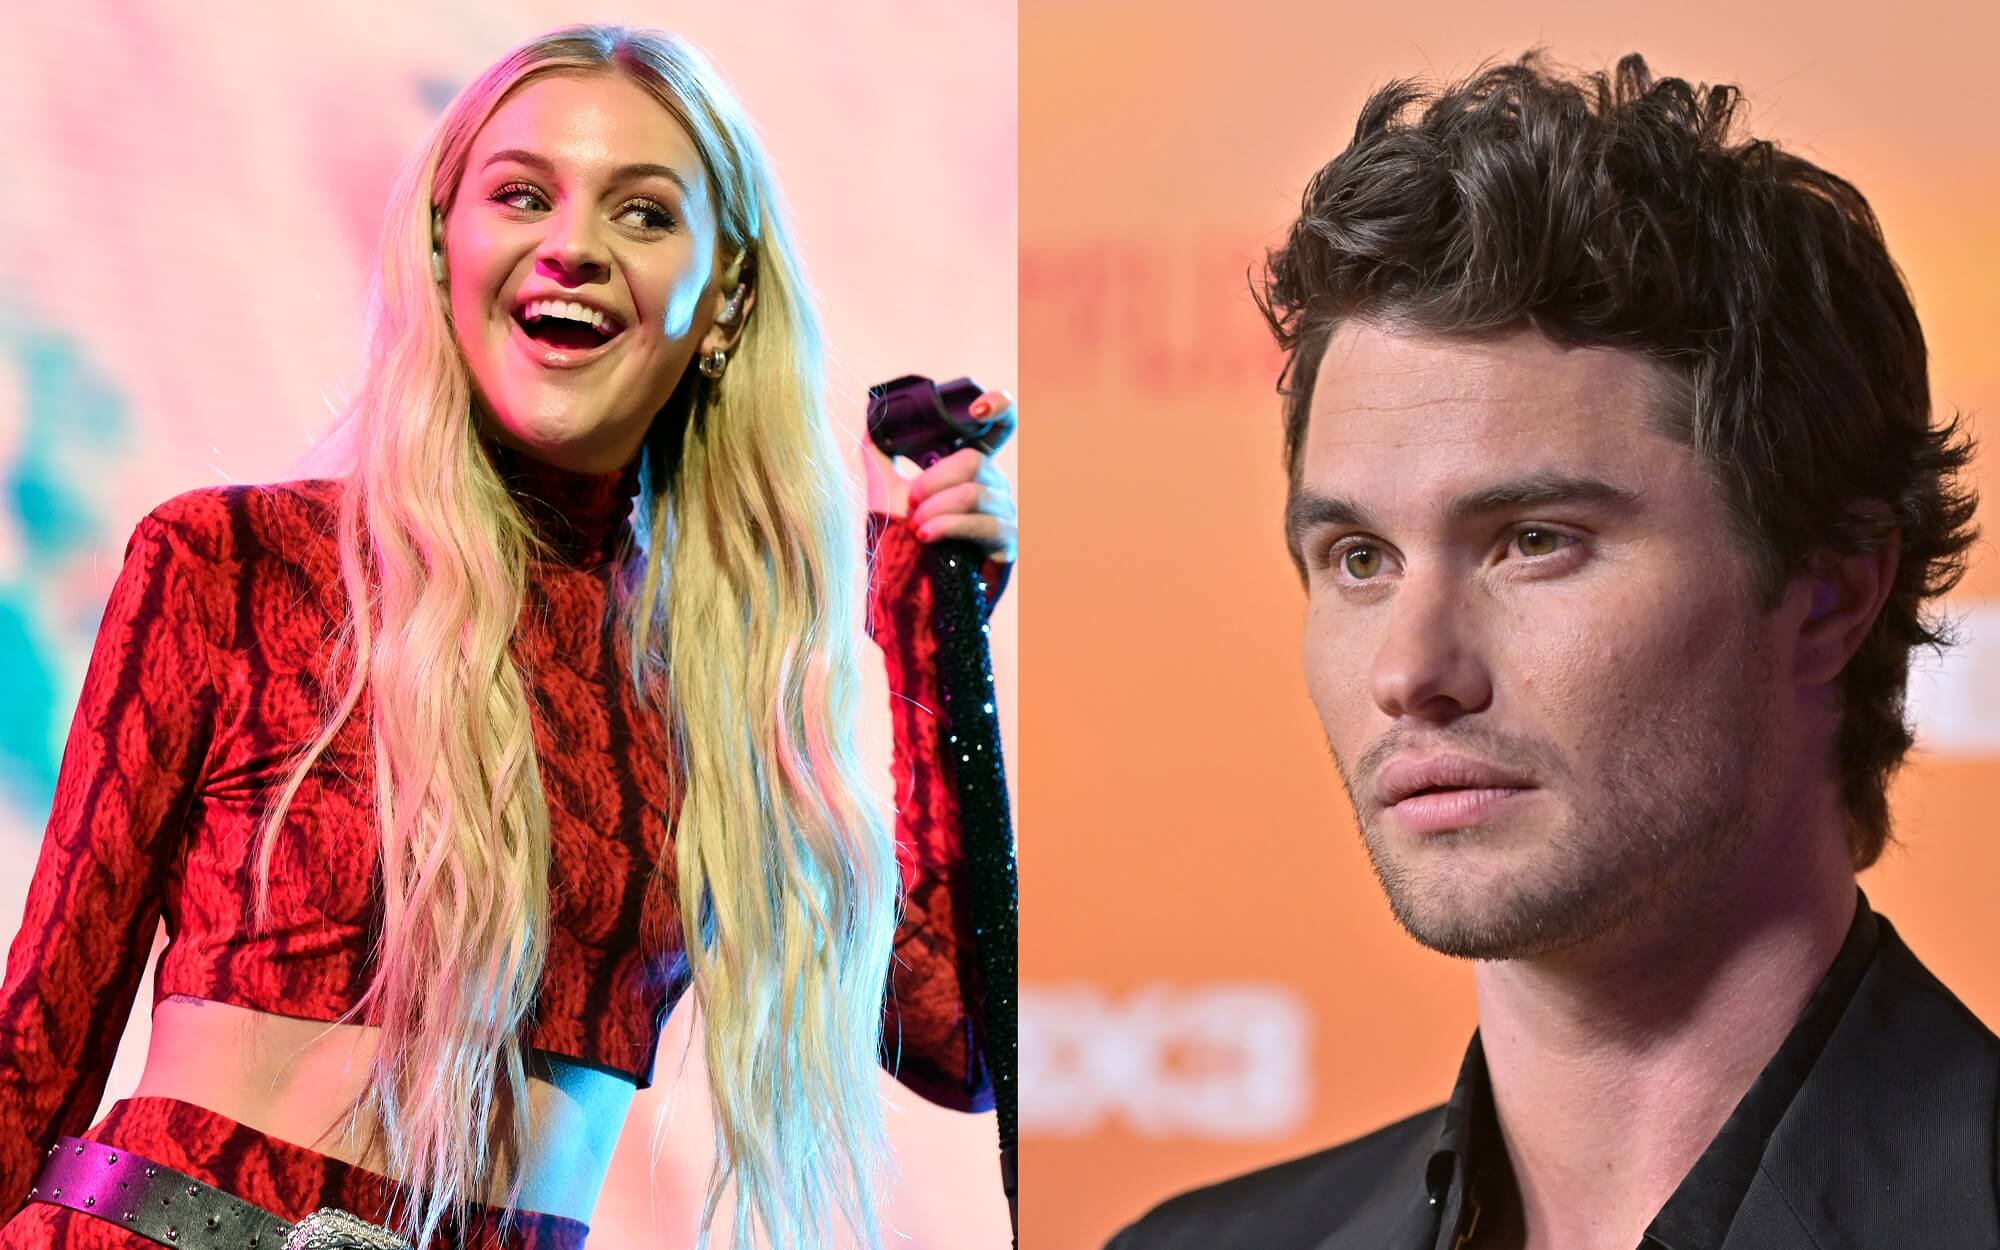 A joined photo of Kelsea Ballerini and Chase Stokes